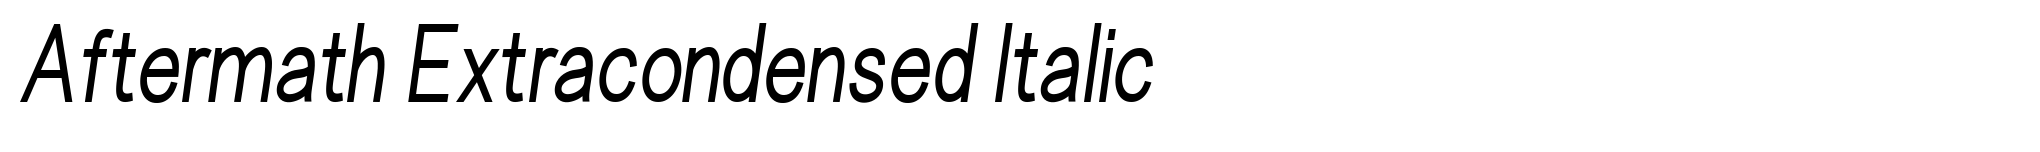 Aftermath Extracondensed Italic image